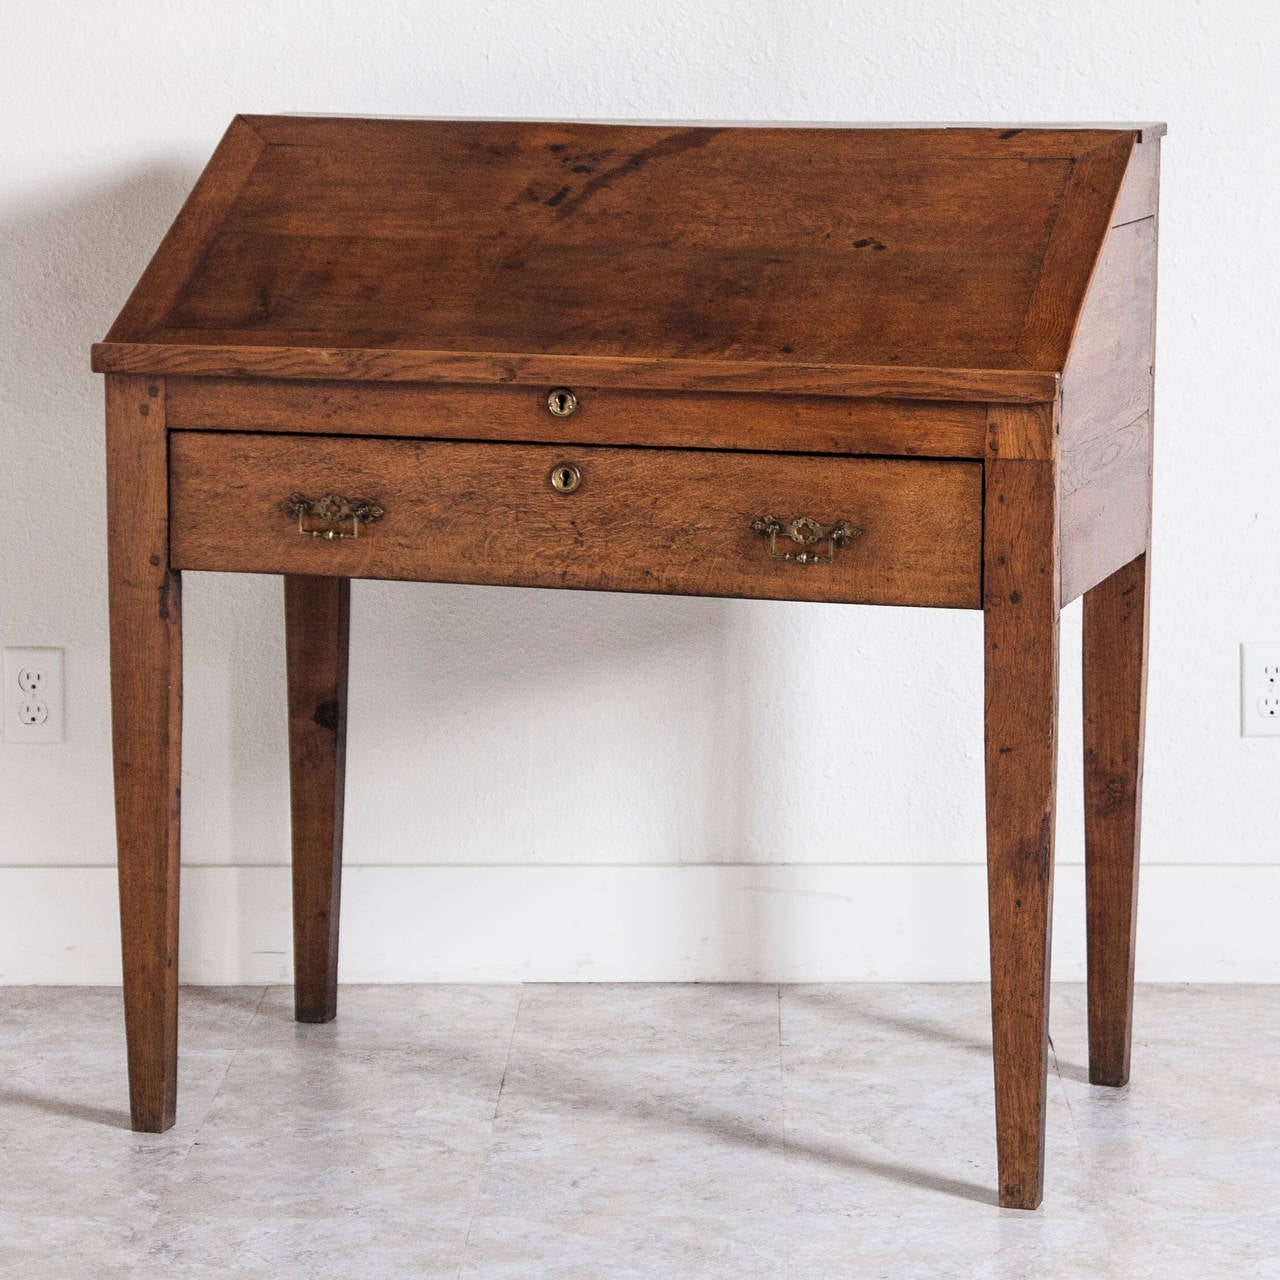 Simple construction, clean lines, and beautifully aged wood give this desk a wonderfully comfortable and warm feel. An excellent scale for narrow spaces while still having a great deal of work space for writing and drawing. This early 19th century